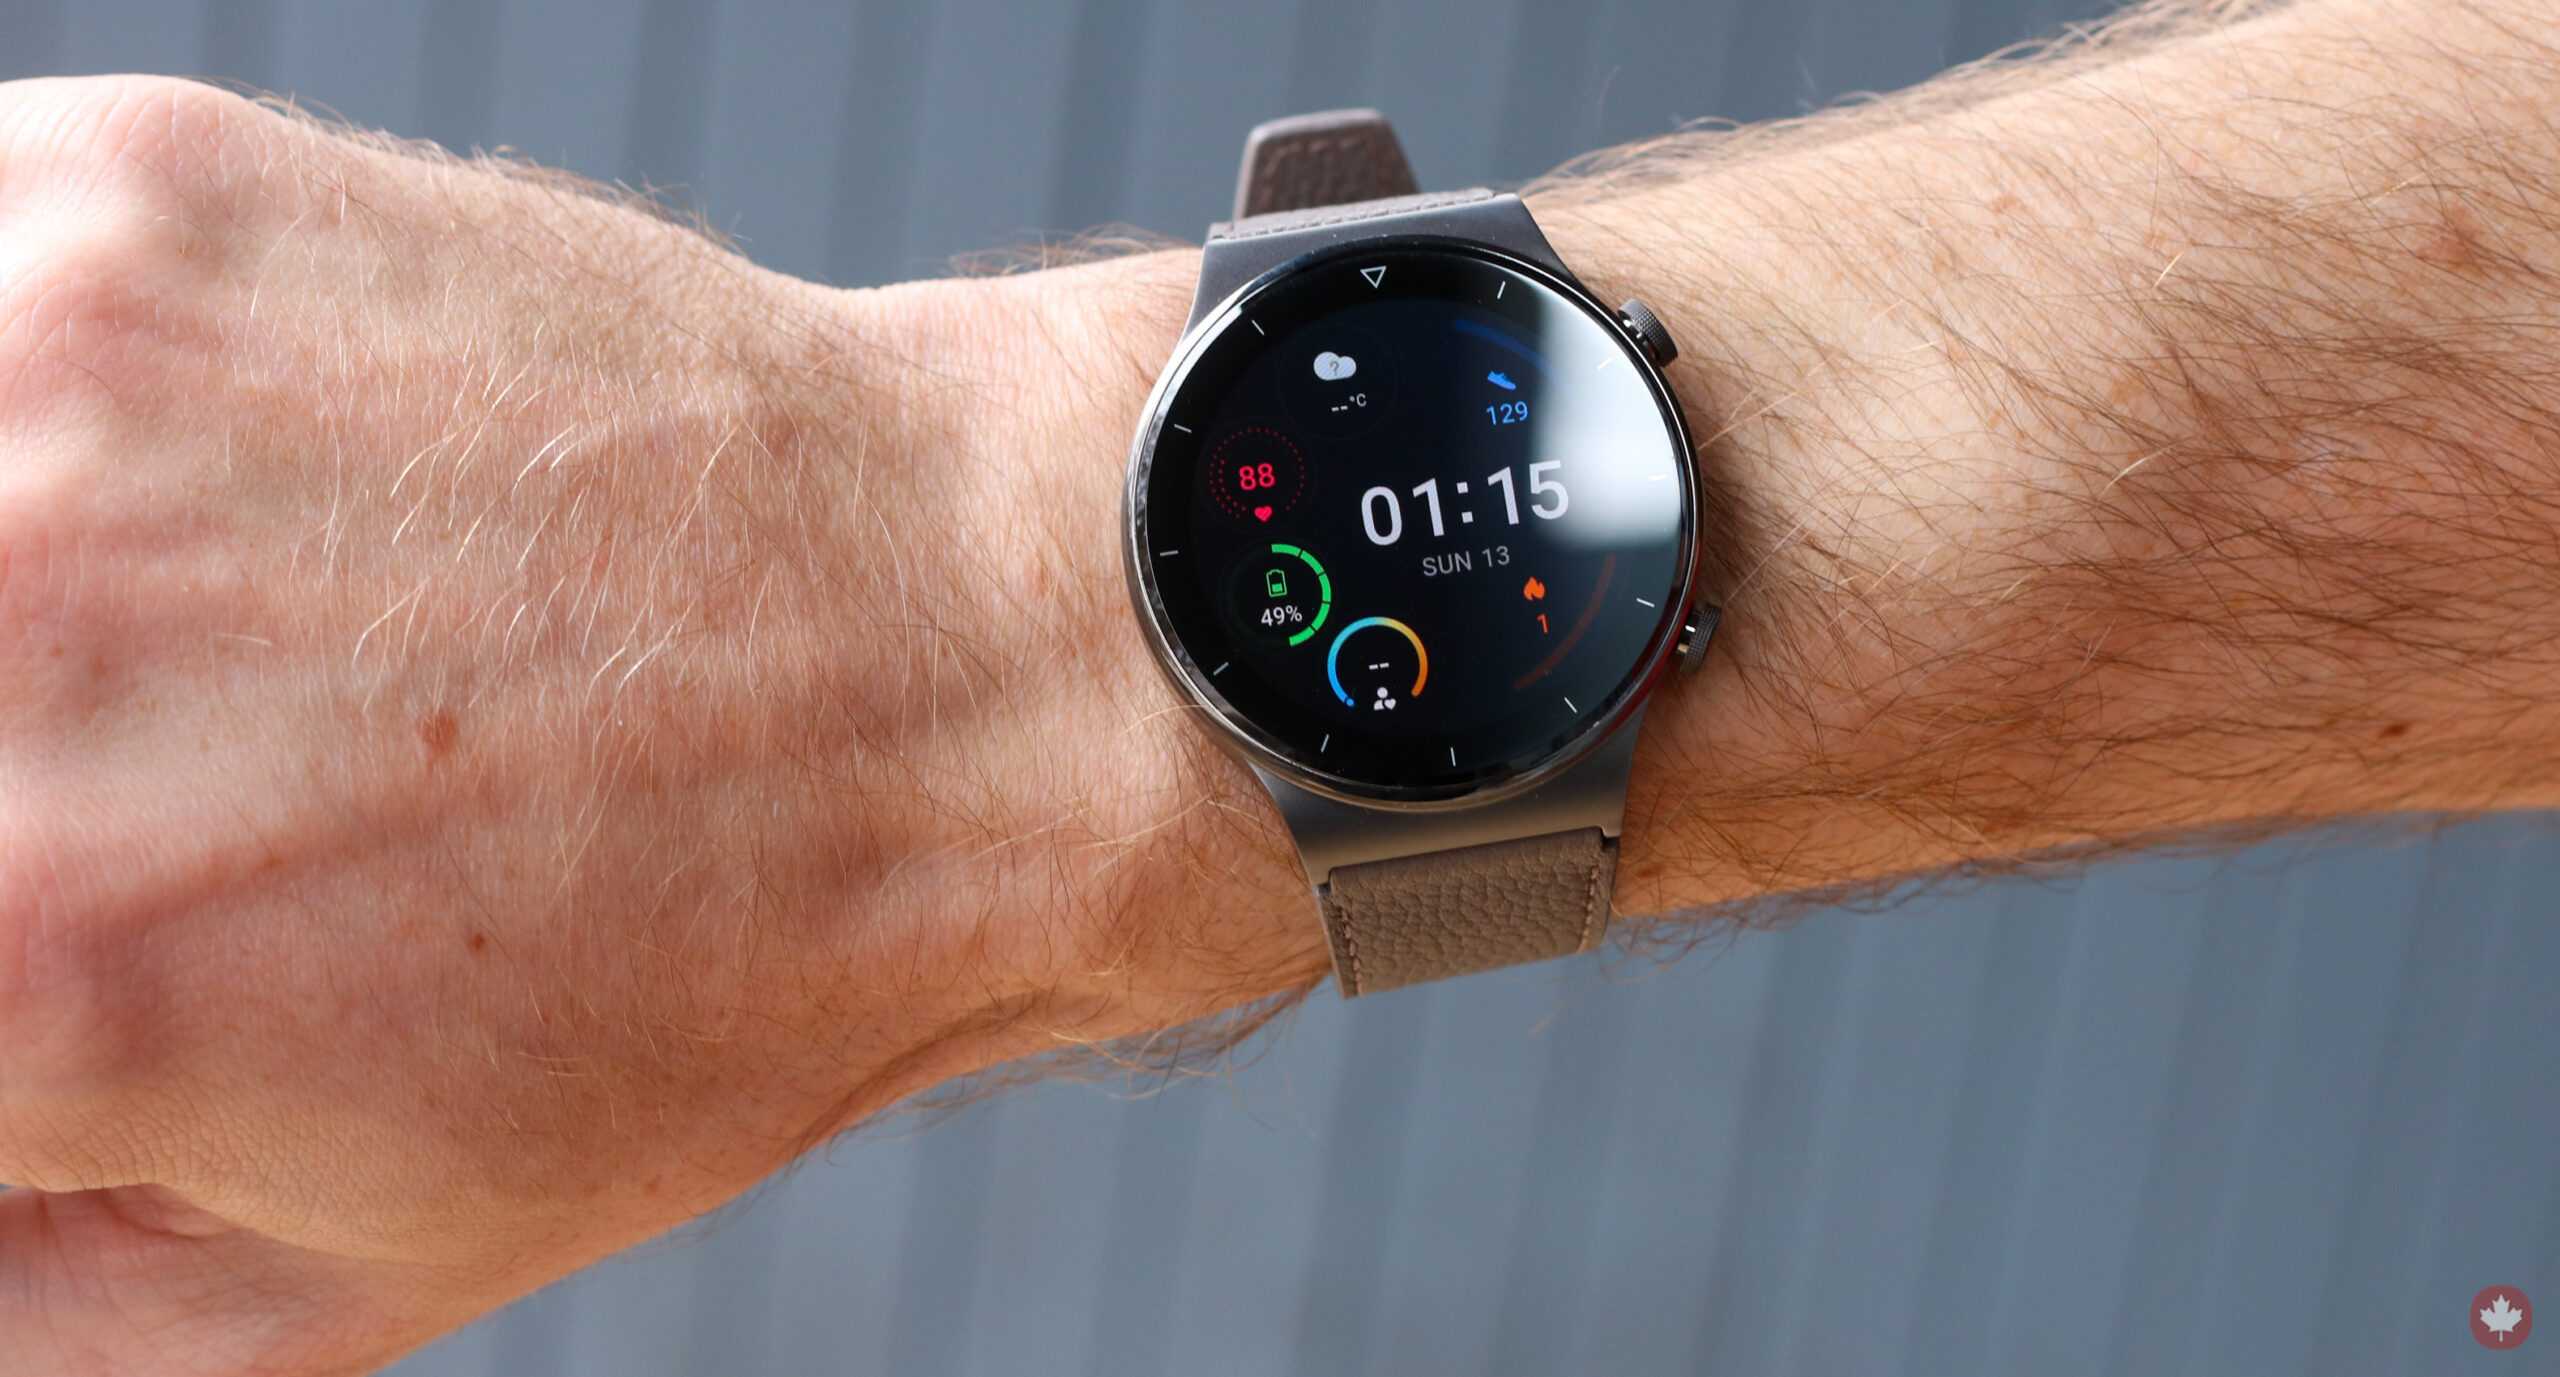 Huawei’s upscale watch gt2 pro puts an emphasis on health and long battery life